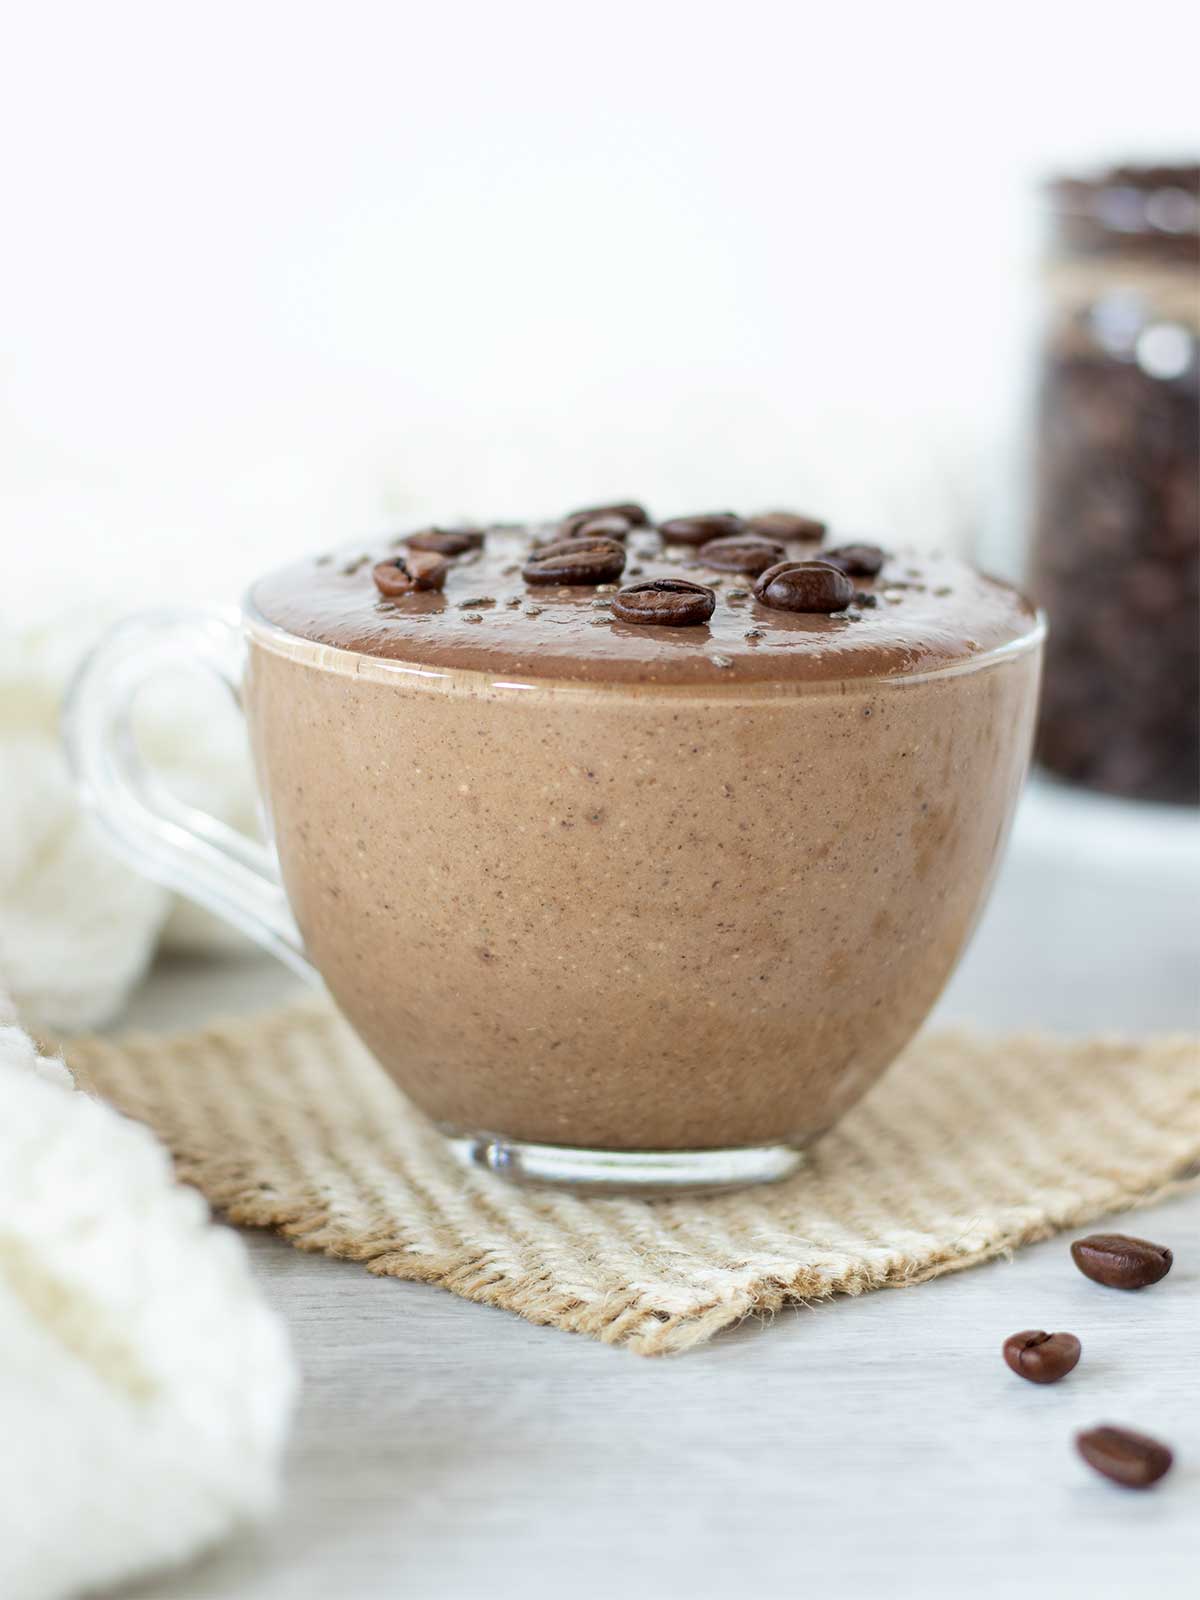 Cold chocolate caffeine smoothie in a glas cup with coffee beans and woolen scarf